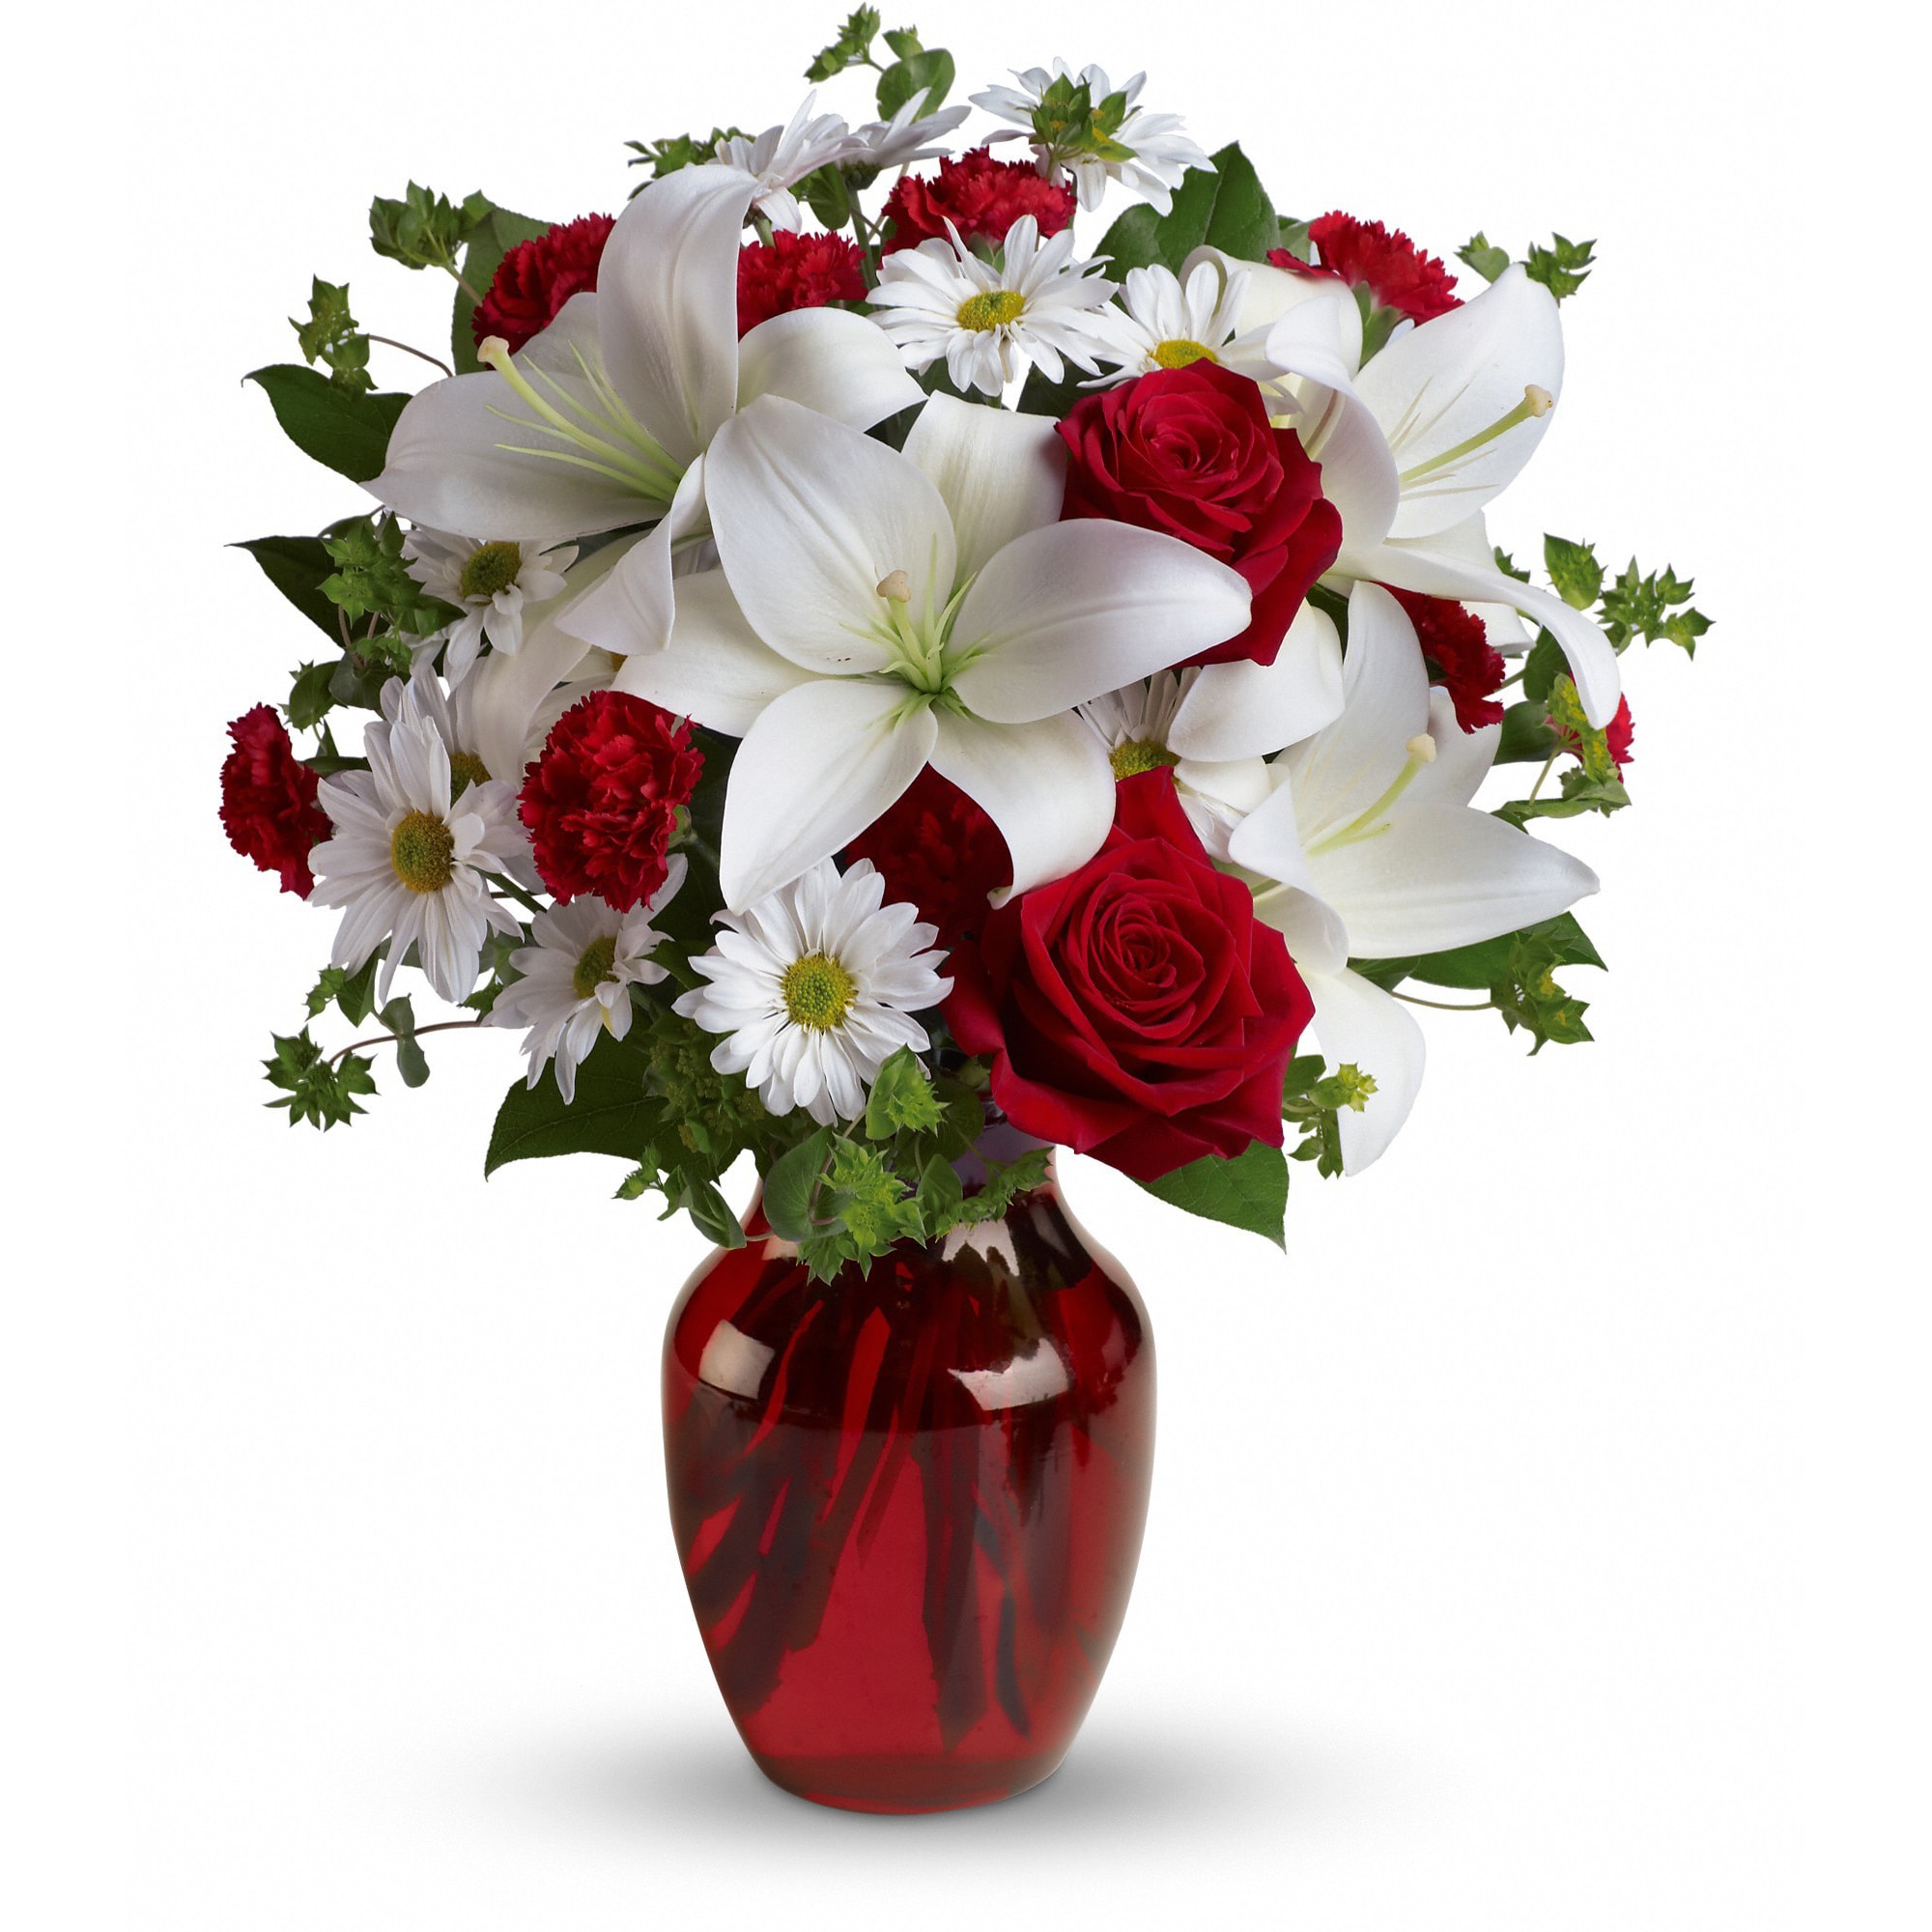 Be My Love Bouquet - The spirit of love and romance is beautifully captured in this enchanting bouquet. It's the perfect gift for anyone you love. T128-2A 